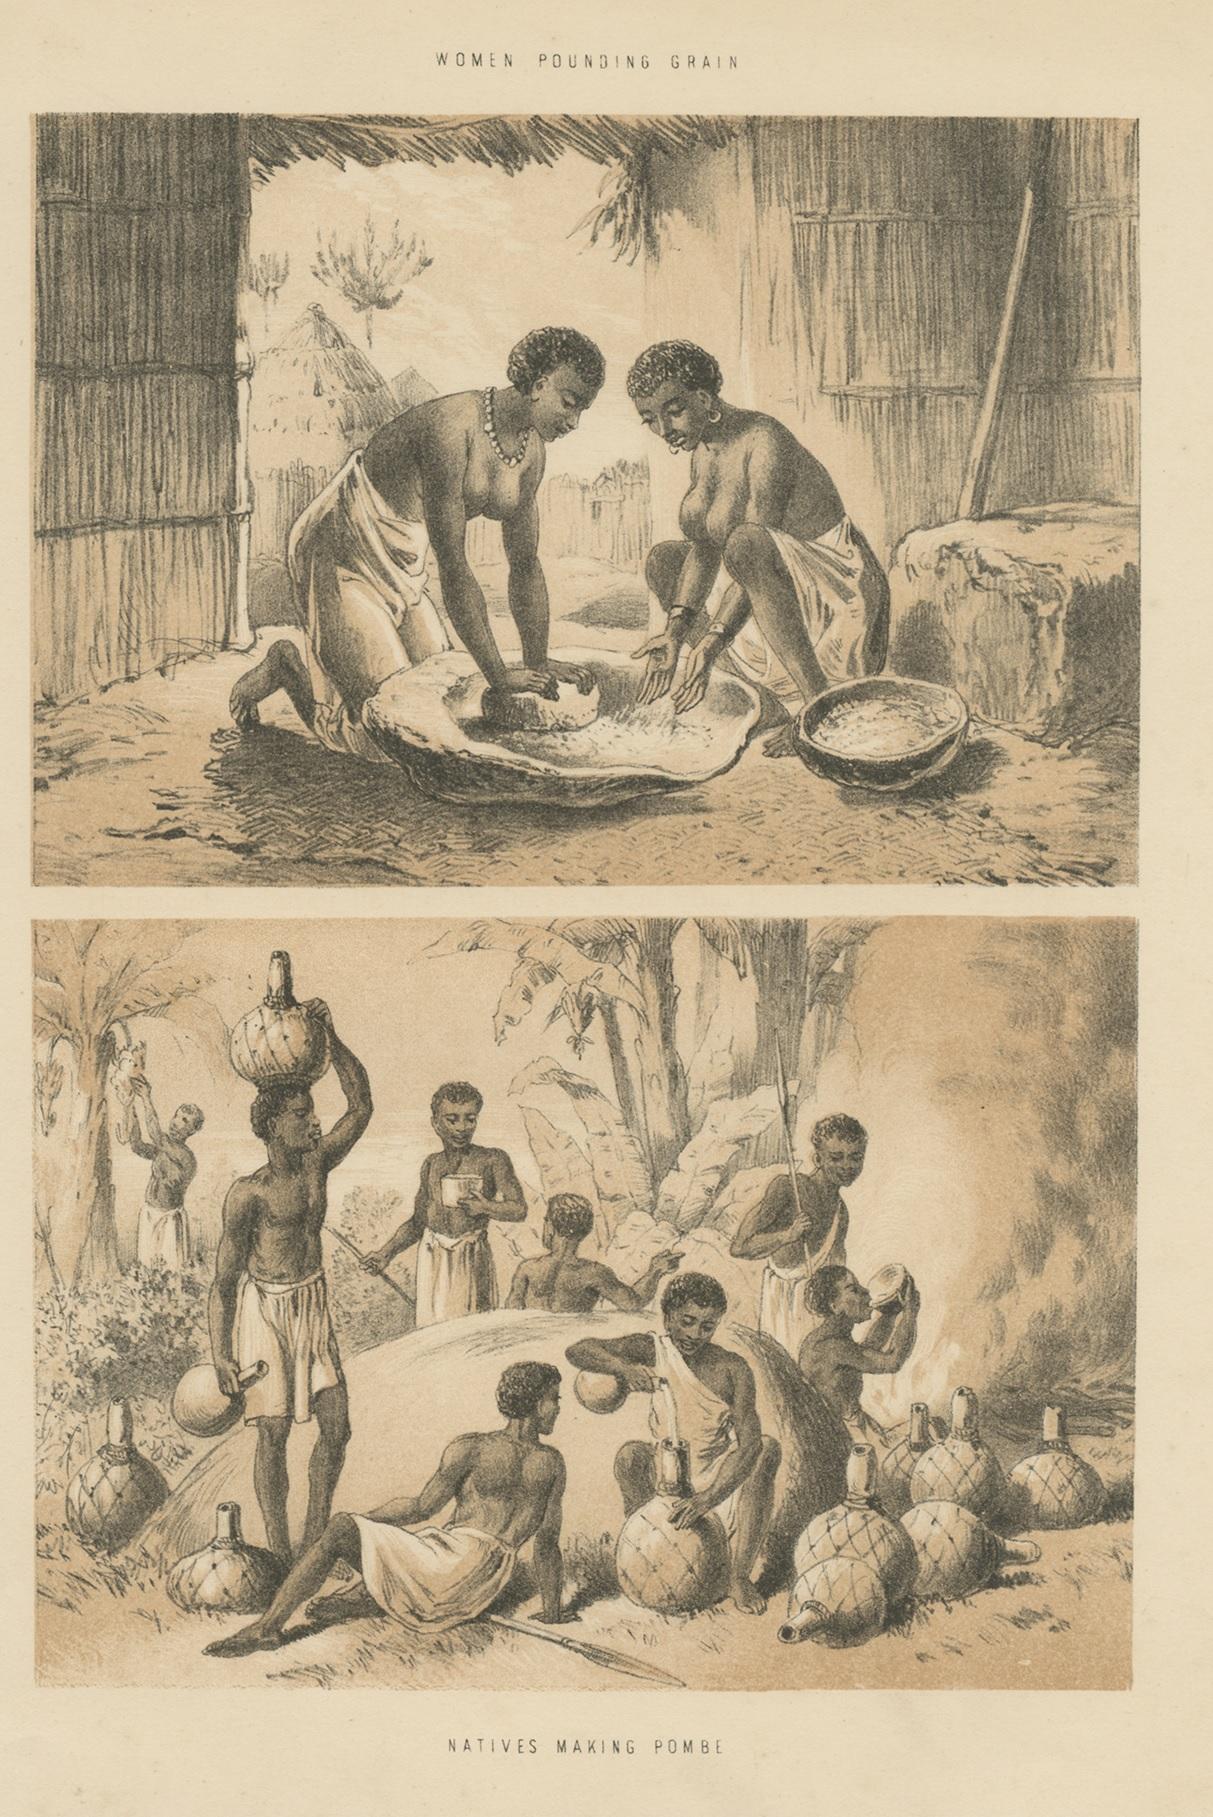 Antique print titled 'Women pounding grain - Natives making Pombe'. Lithograph of two women pounding grain and Africans brewing pombe. Source unknown, to be determined. Published, circa 1860.